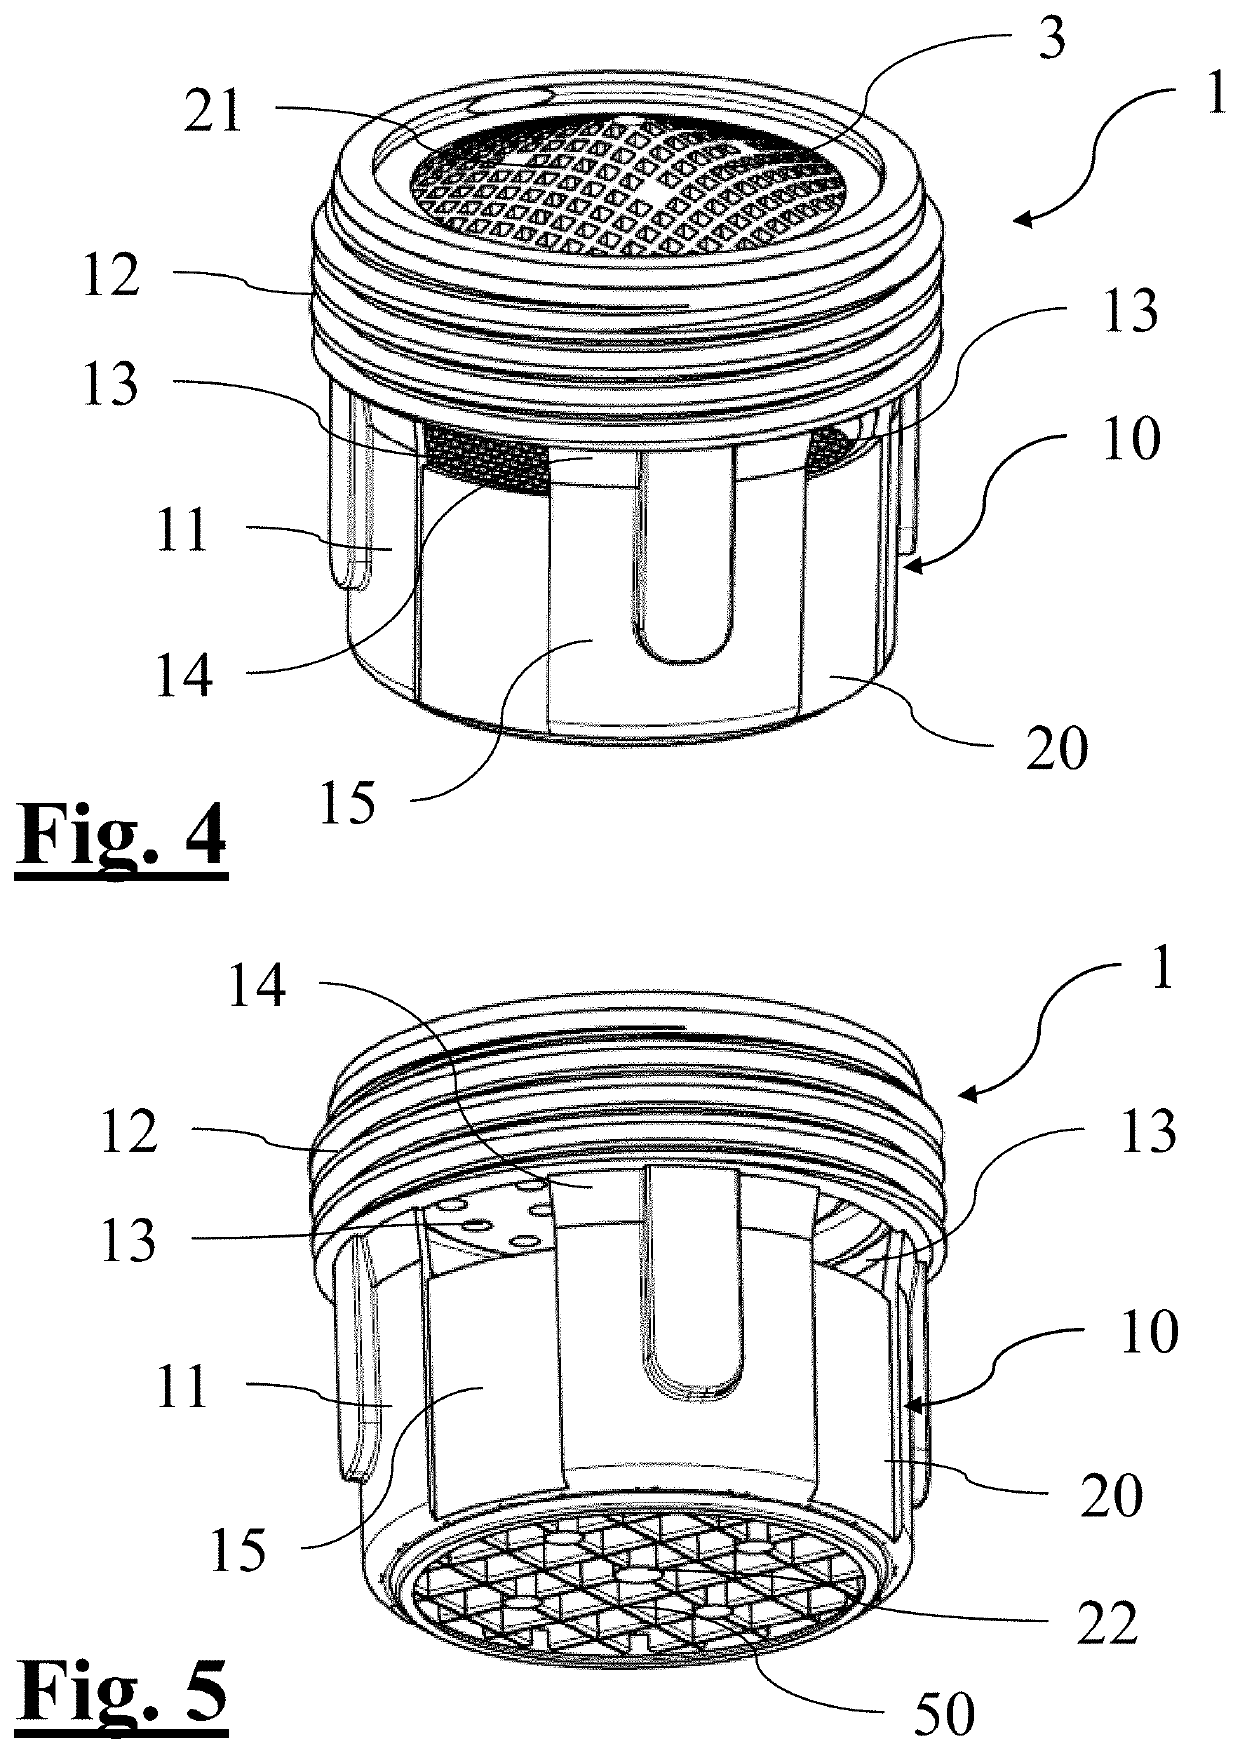 Faucet assembly with aerator cartridge and method for mounting said assembly